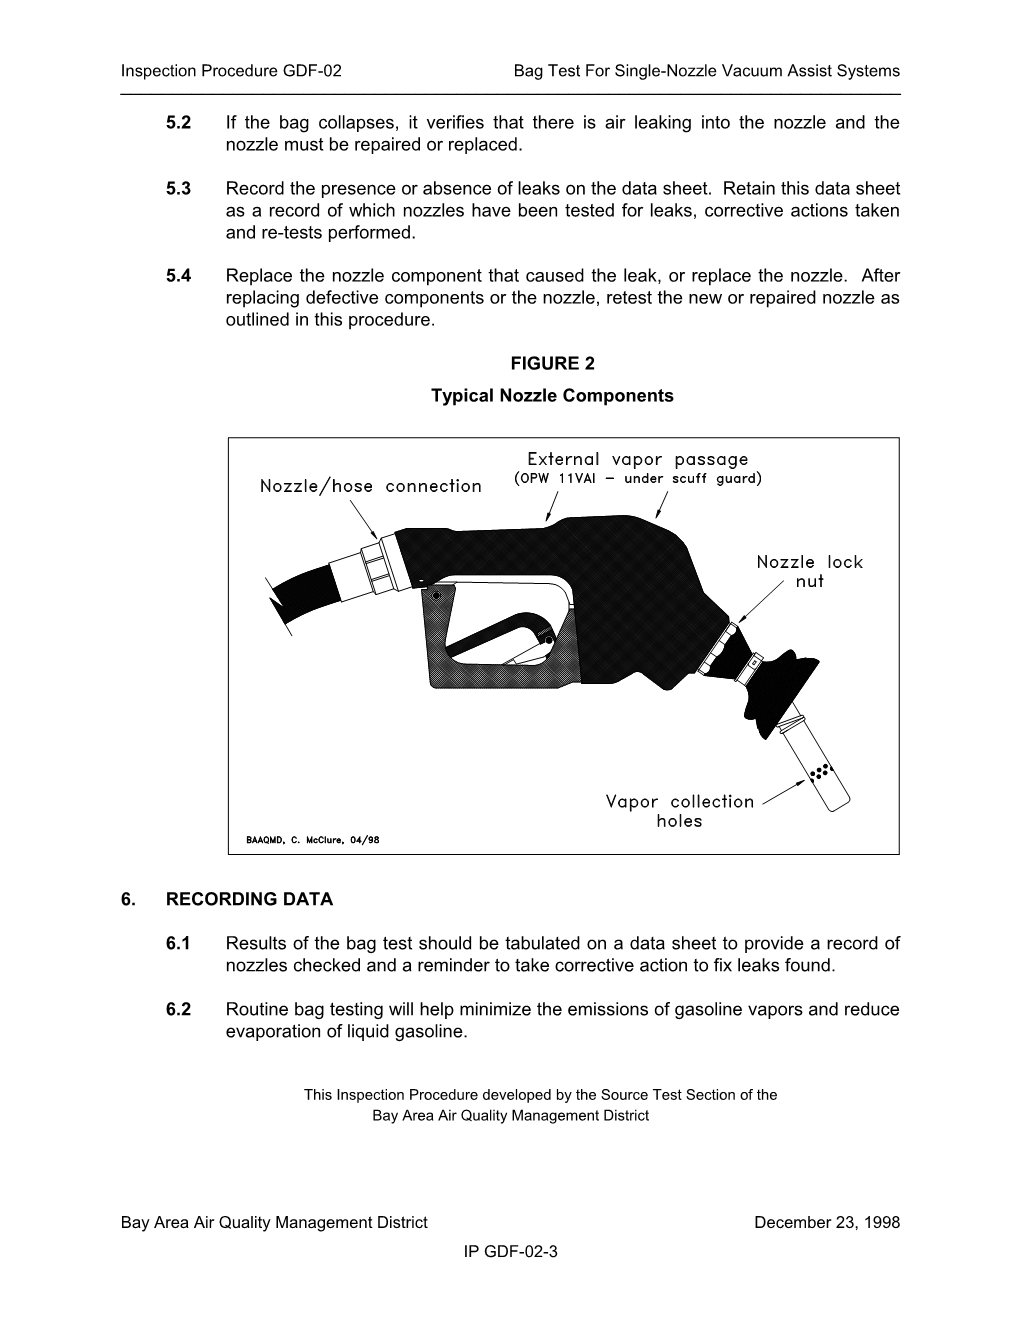 Guidance Document: 1998-12-23 BAAQMD Inspection Procedure GDF-02 - Bag Test for Single-Nozzle